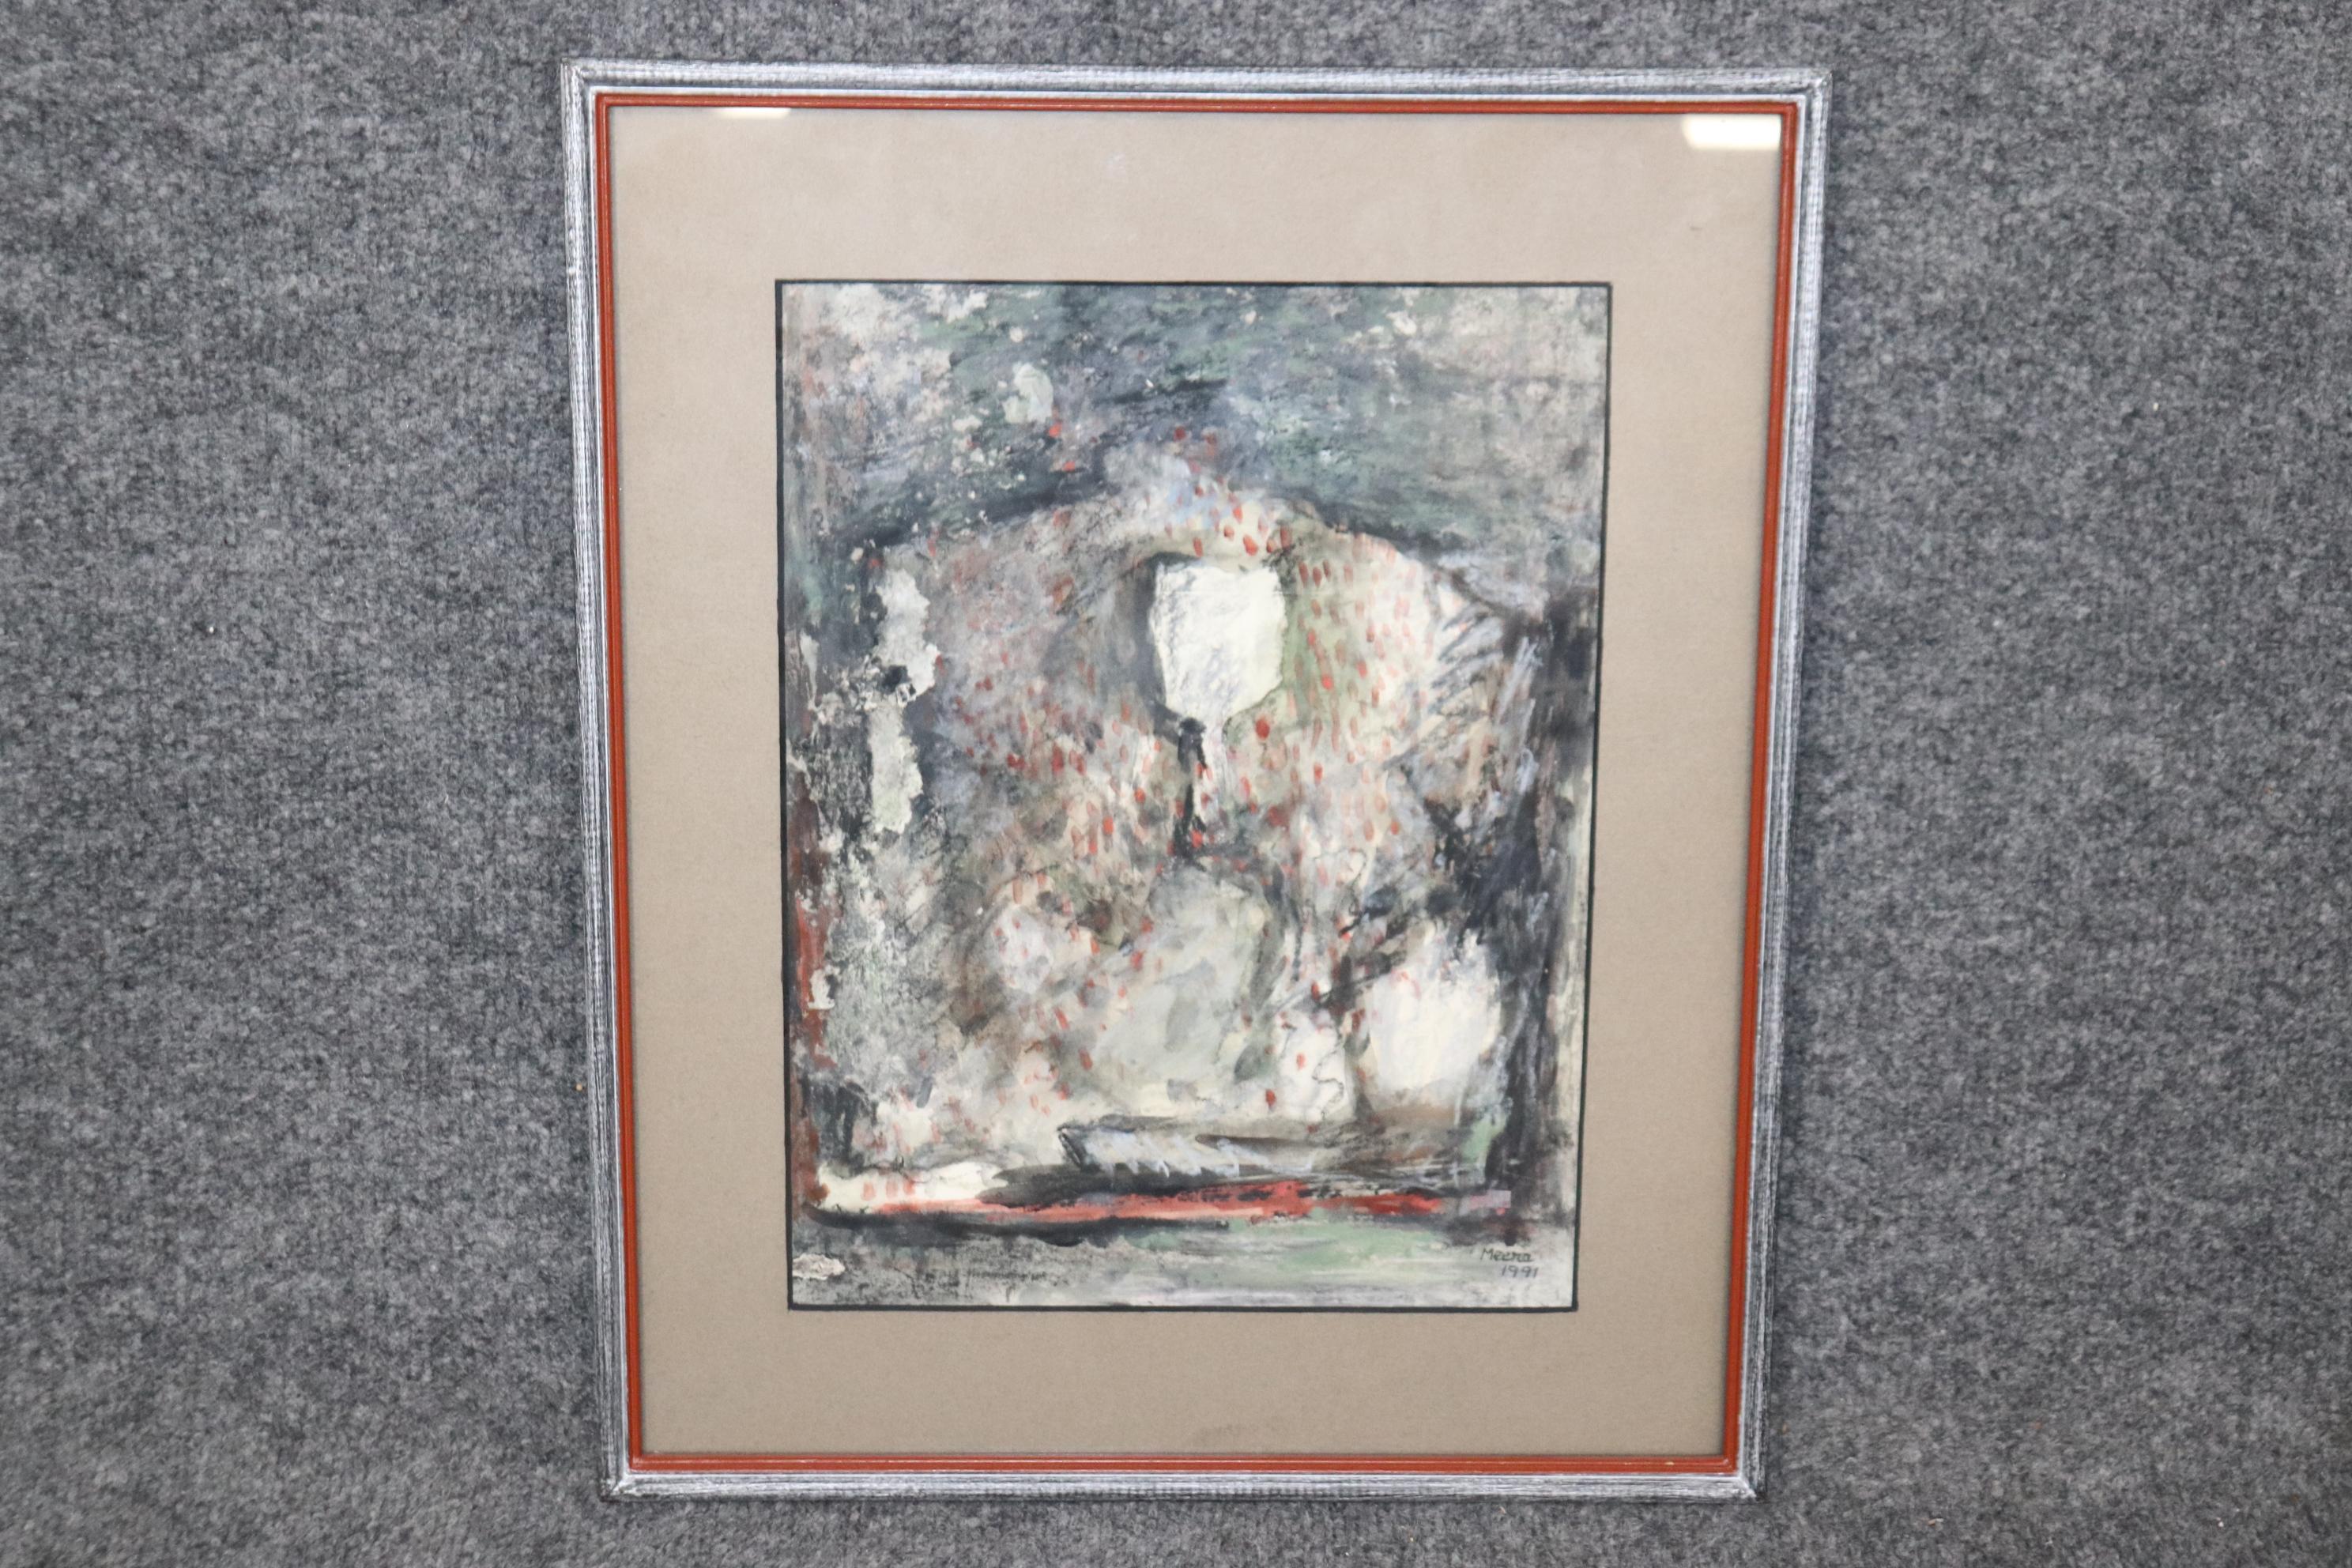 
Dimensions:  H: 17 1/2in W: 14 1/2in D: 1/2in

This vintage framed and signed Meera Decidayal (Indian, b. 1947) gouache on paper is perfect for you and your home! Being essentially an urban person, Devidayal's paintings are grounded in the plethora